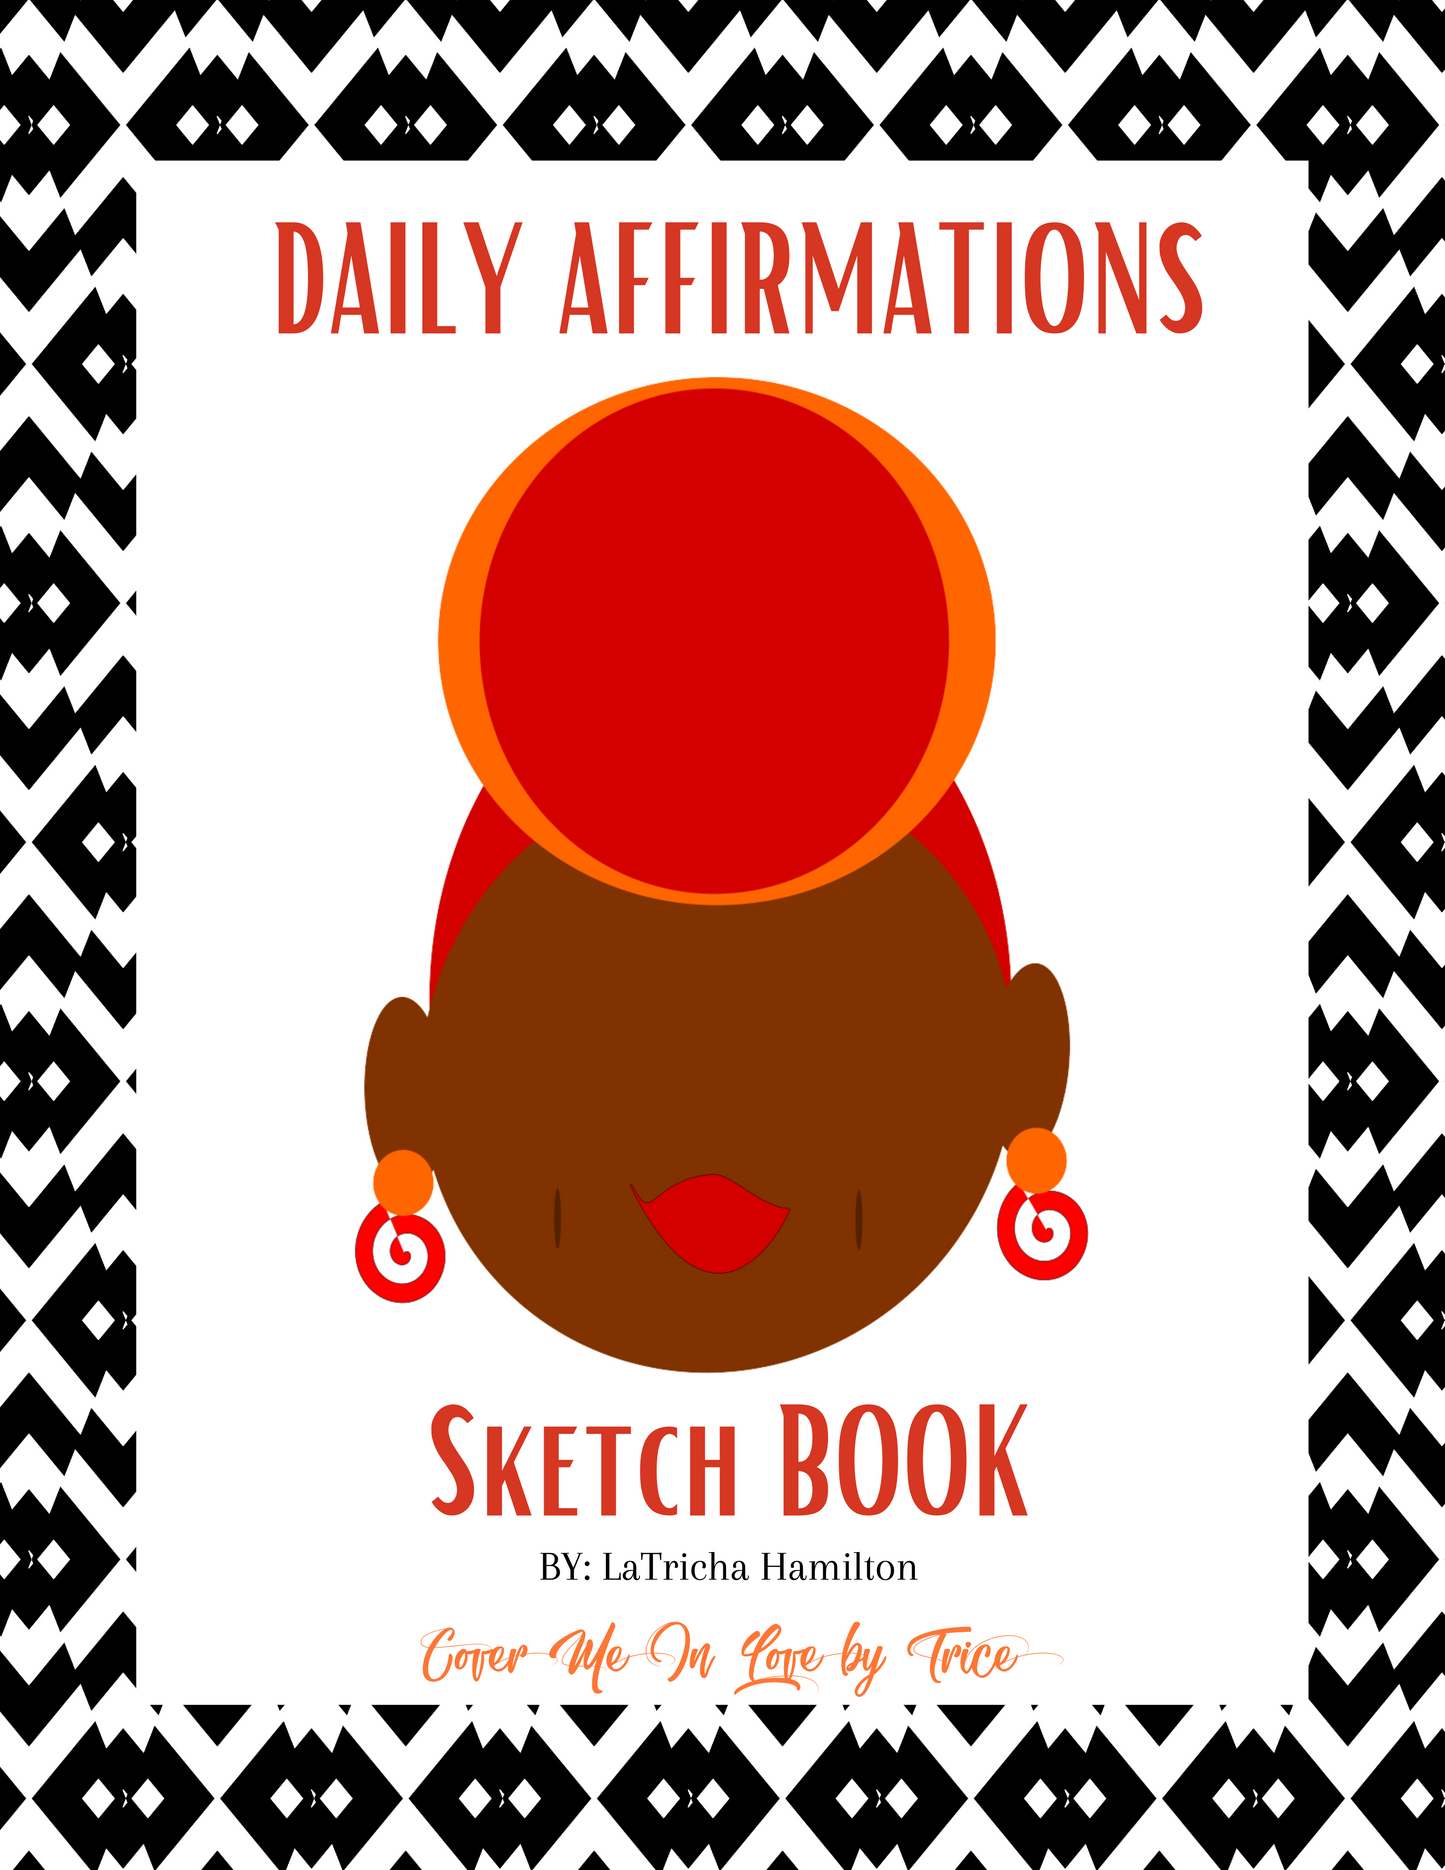 Daily Affirmations Sketch Book